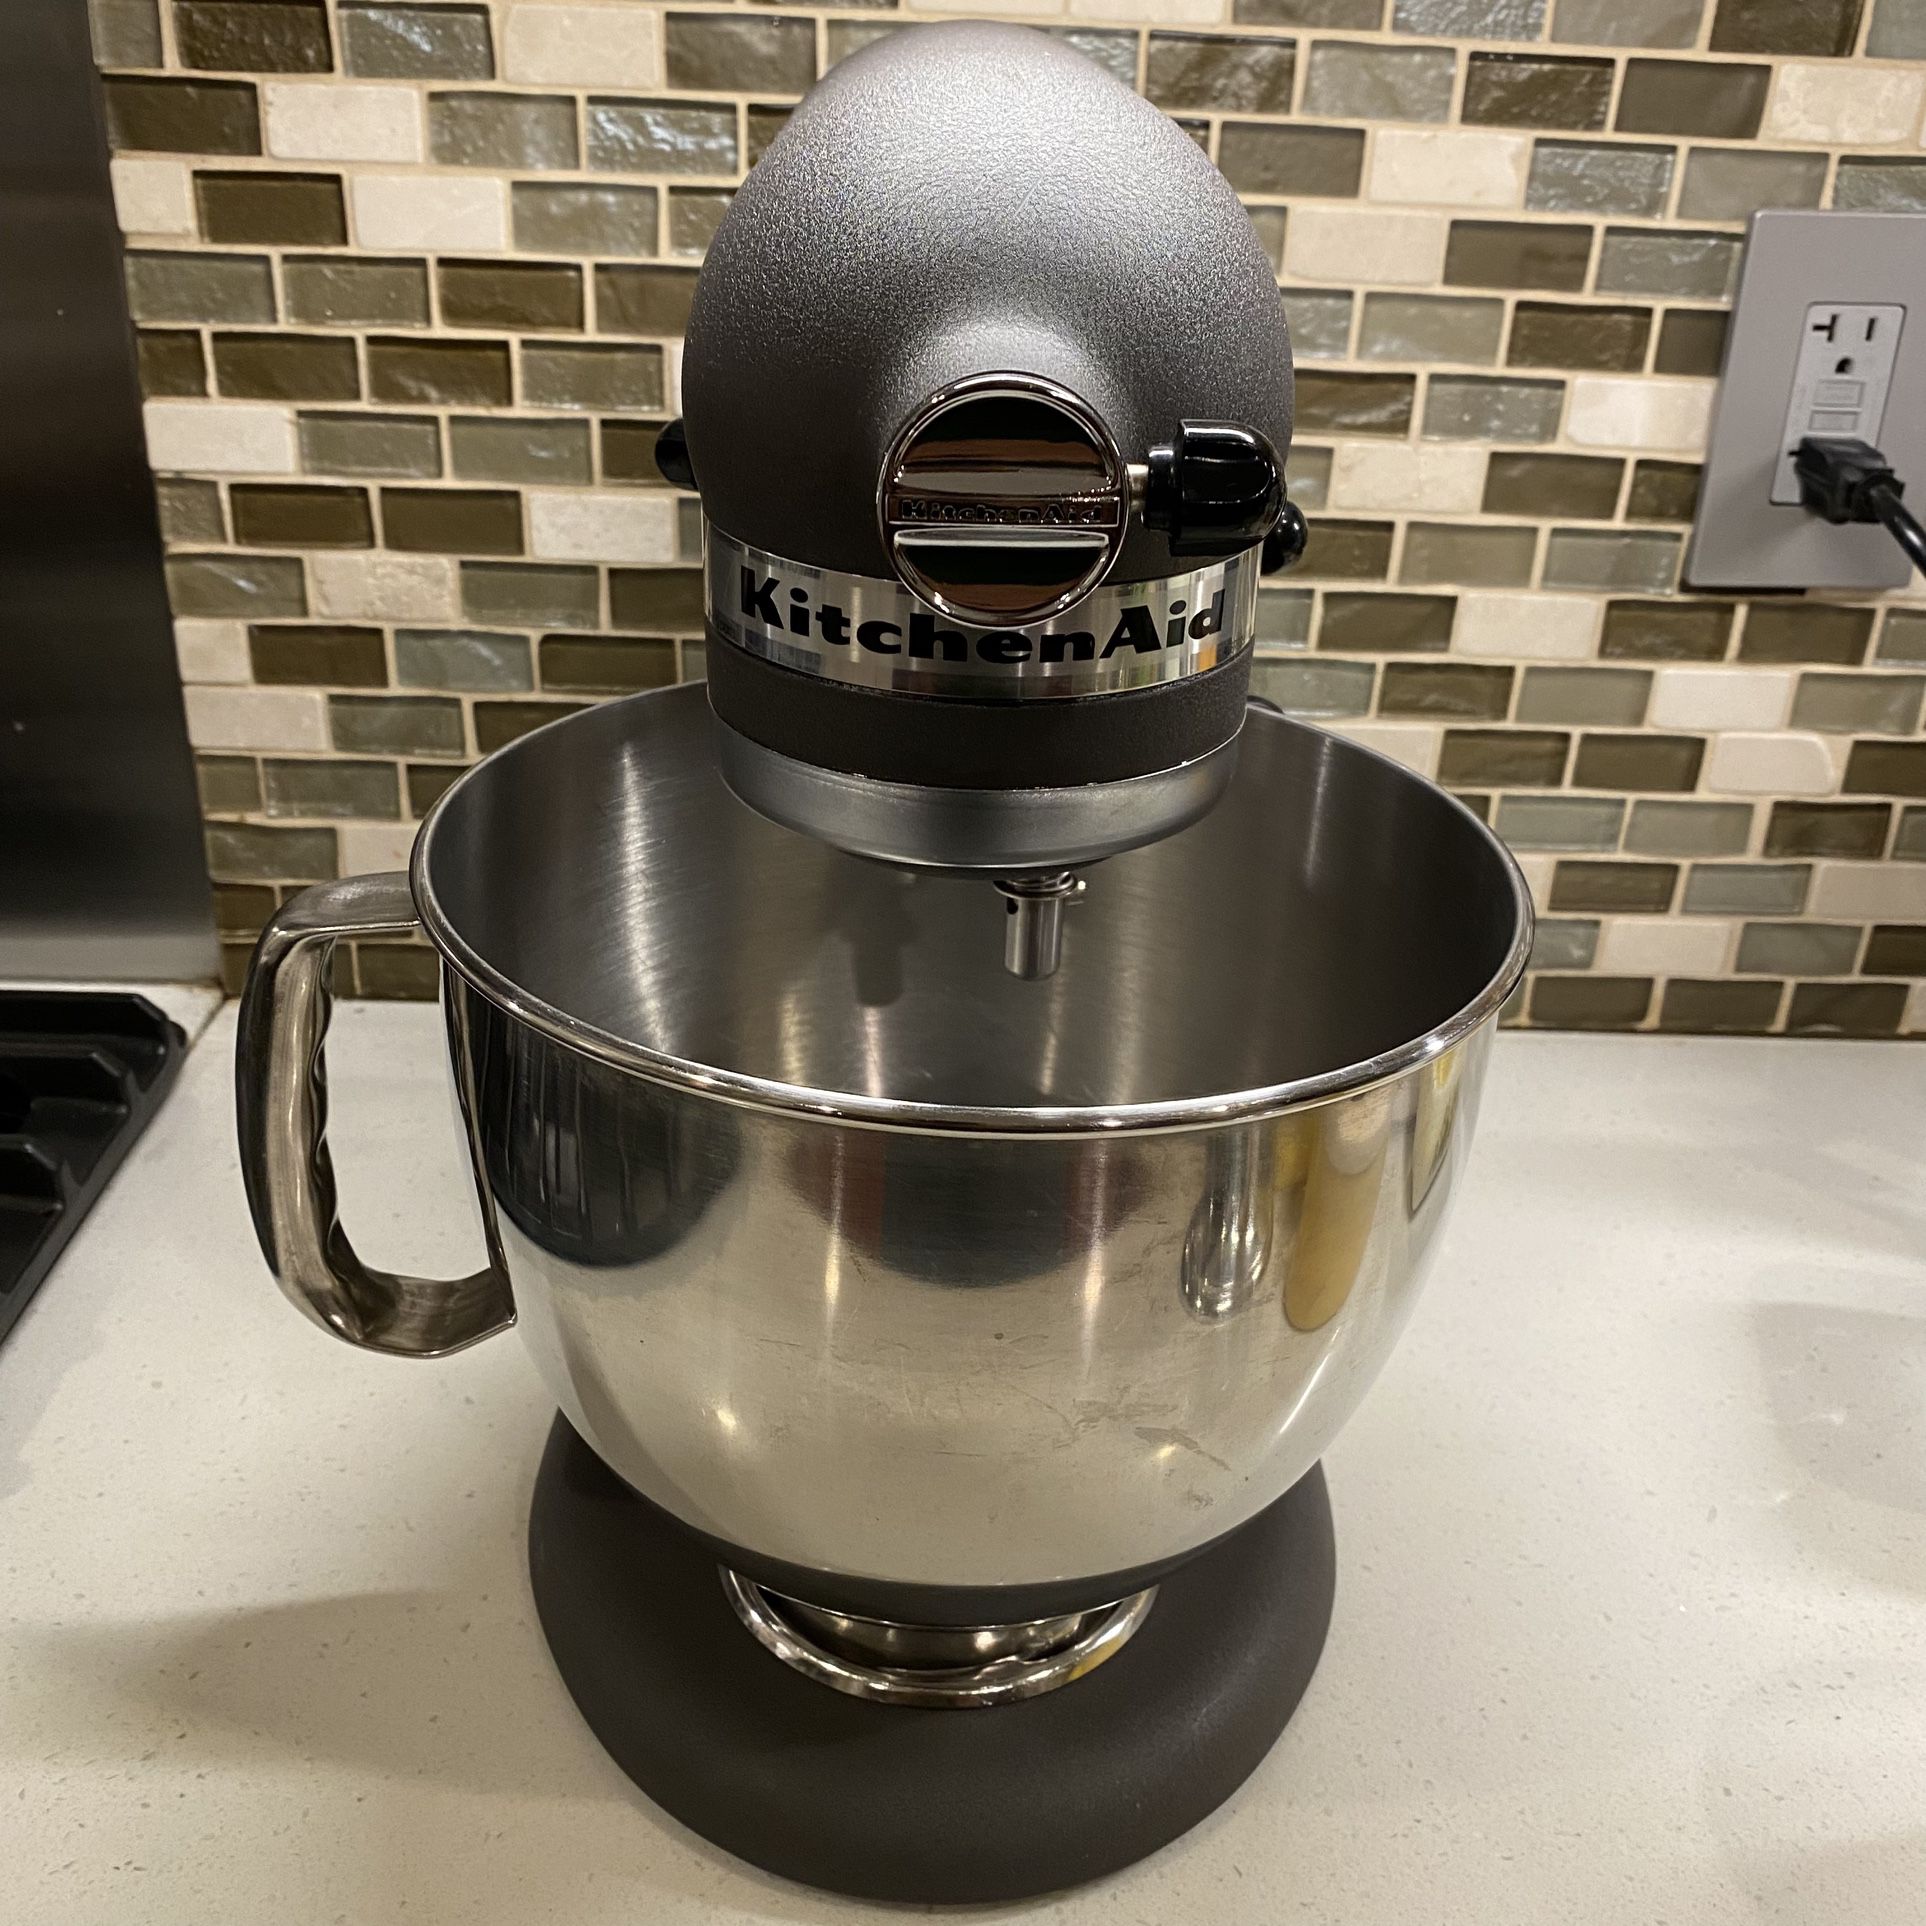 Kenmore Stand Mixer with Attachments for Sale in Katy, TX - OfferUp